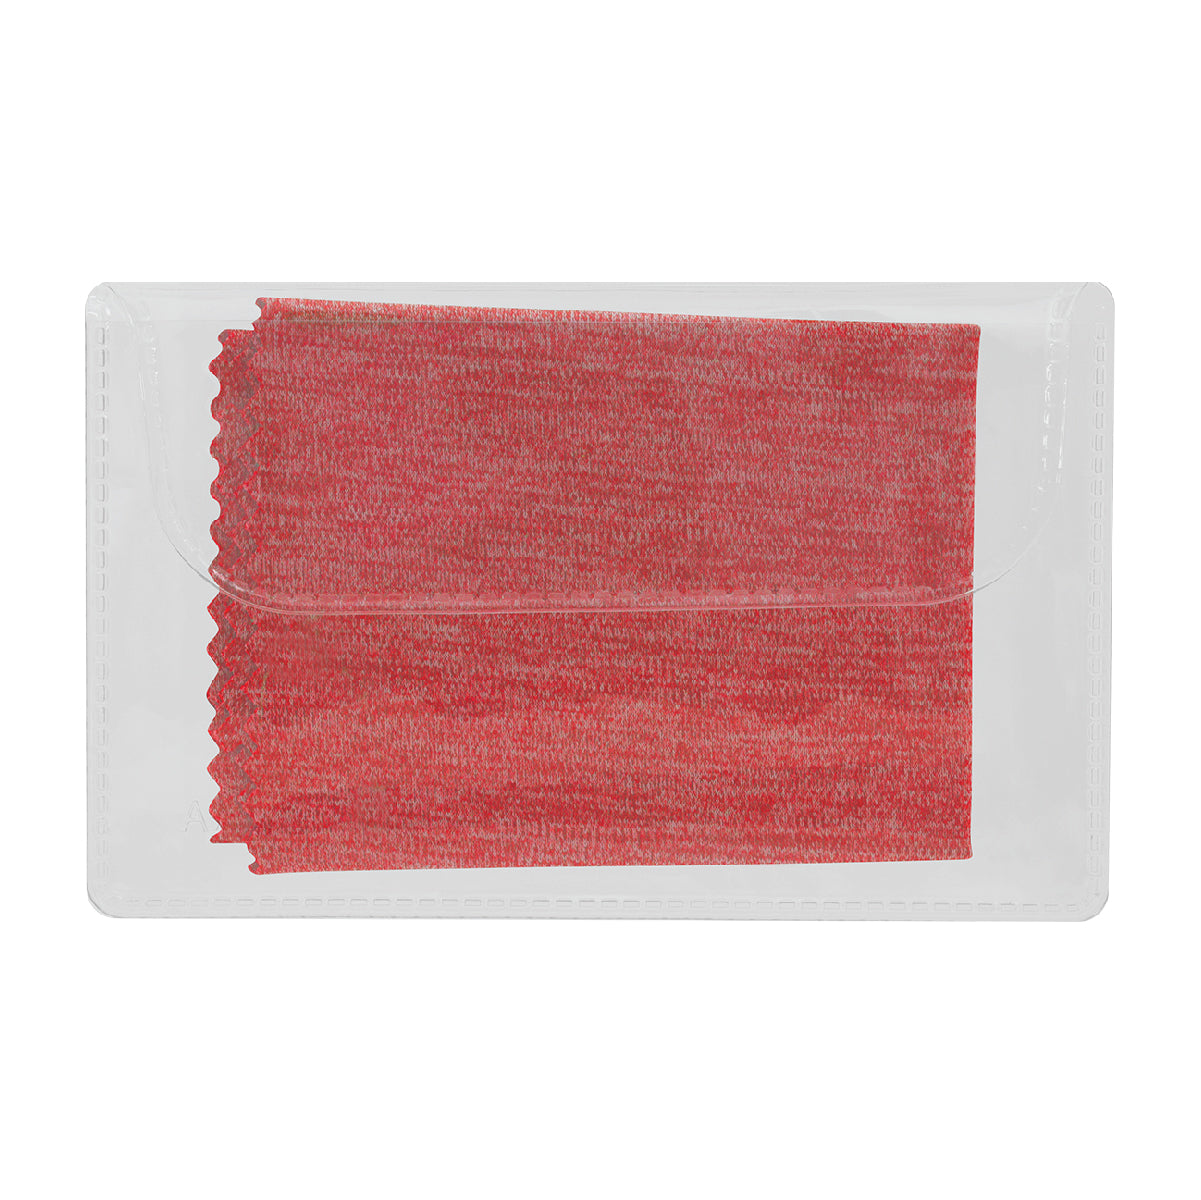 Heathered Cleaning Cloth In Case